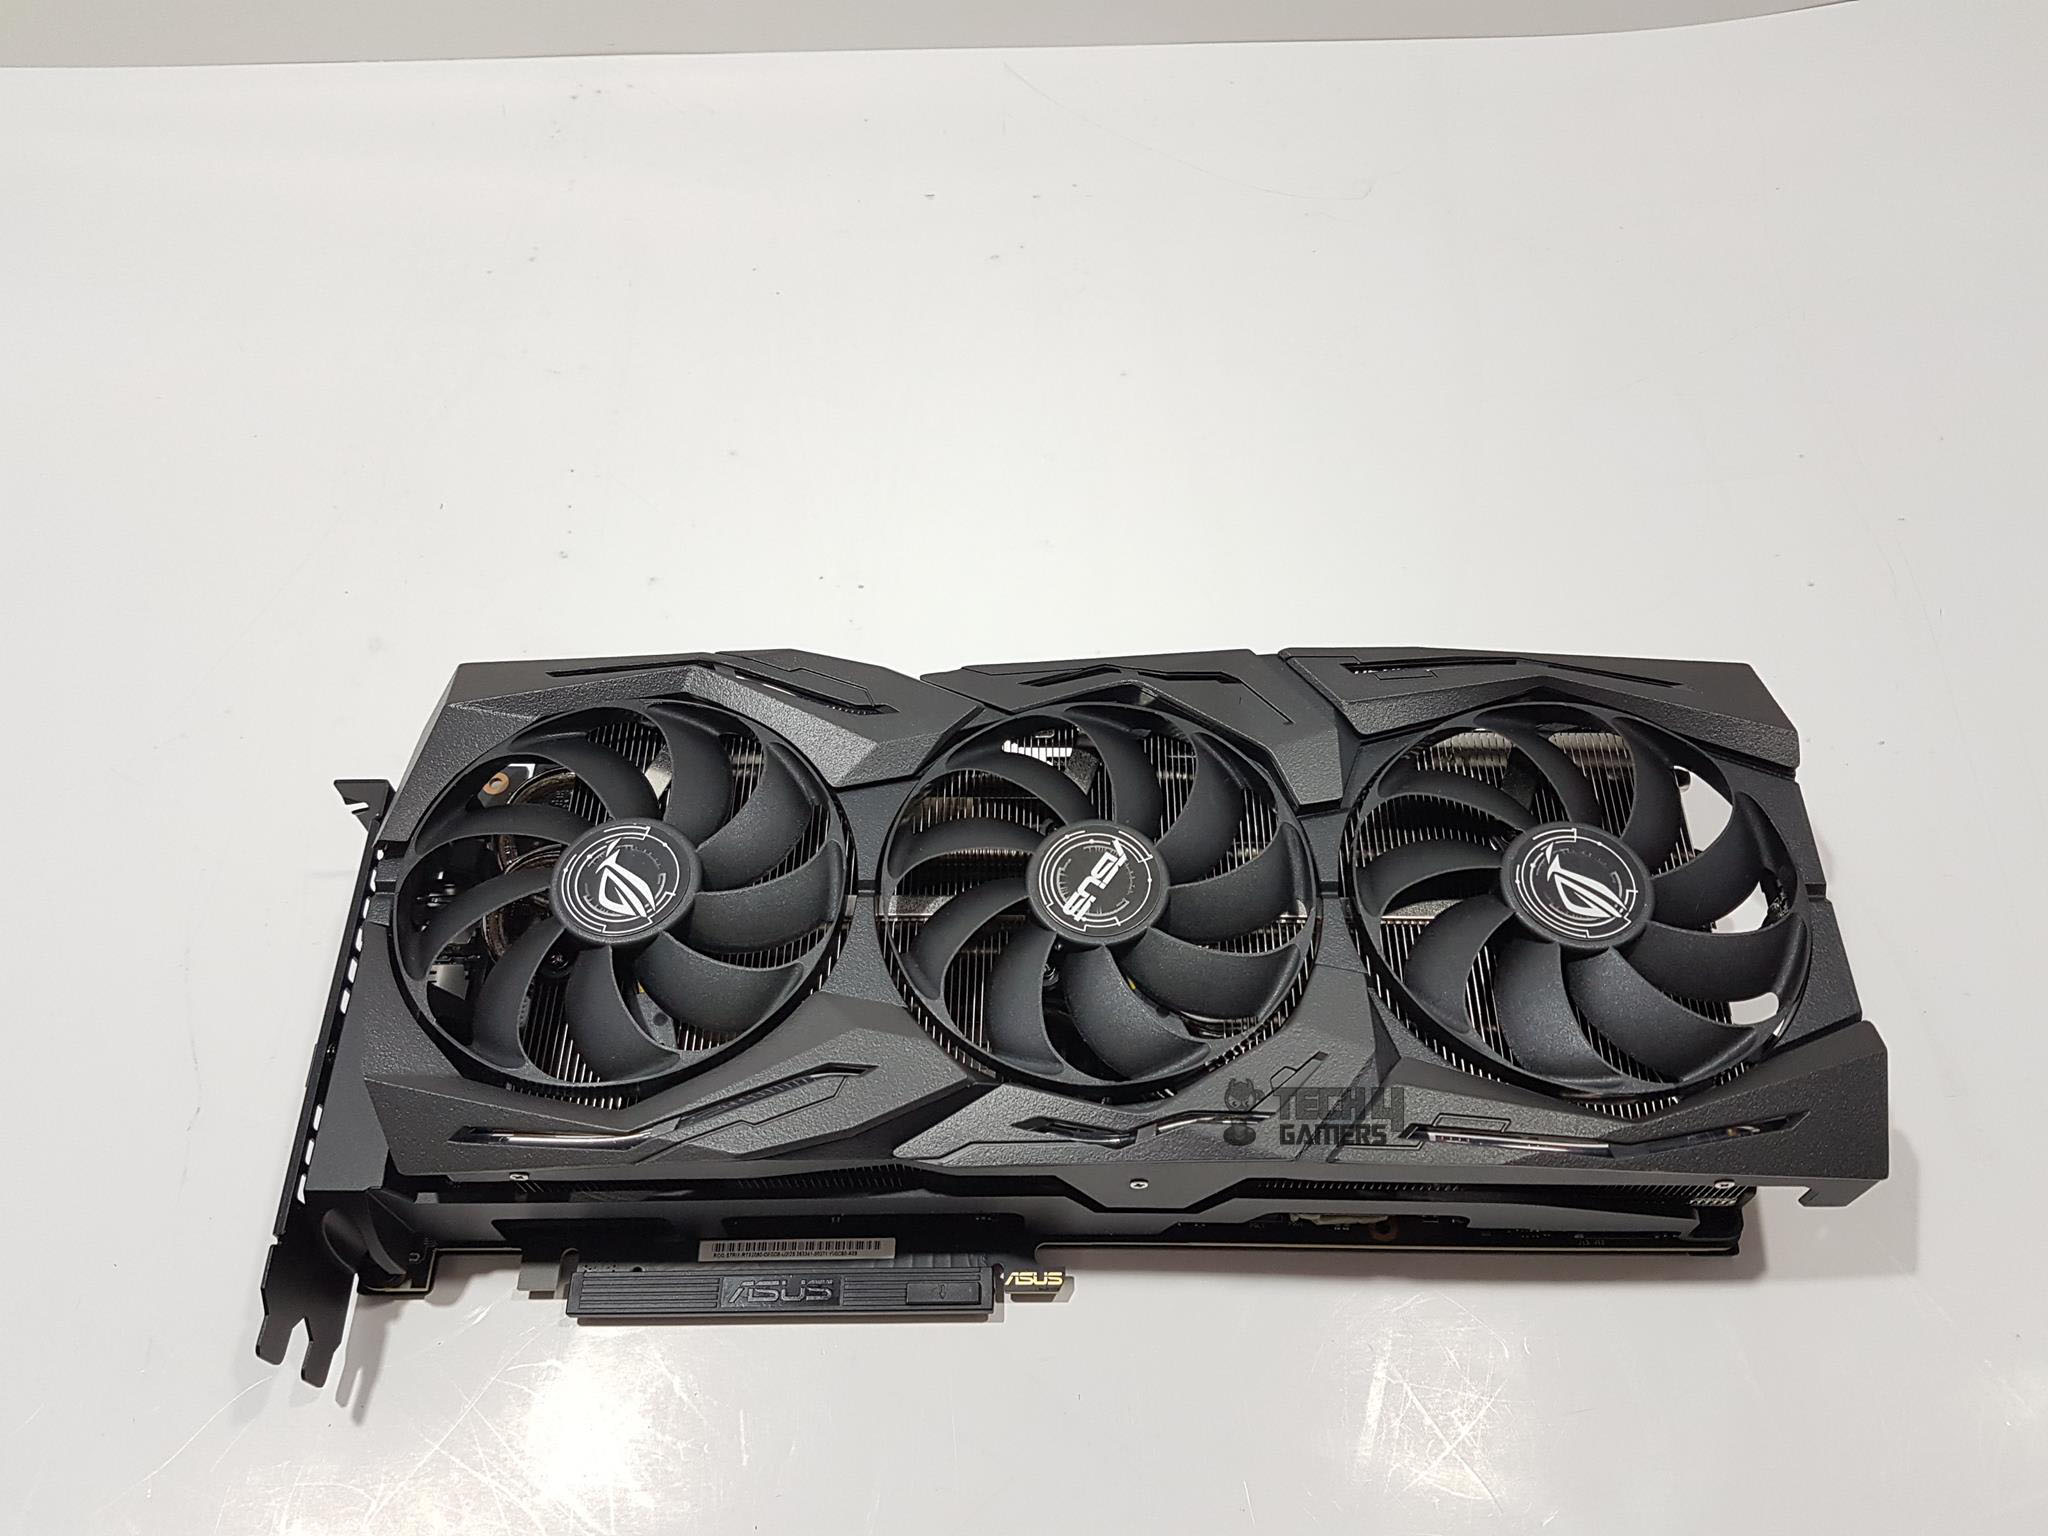 ASUS Strix RTX 2080 8G Gaming Graphics Card Review